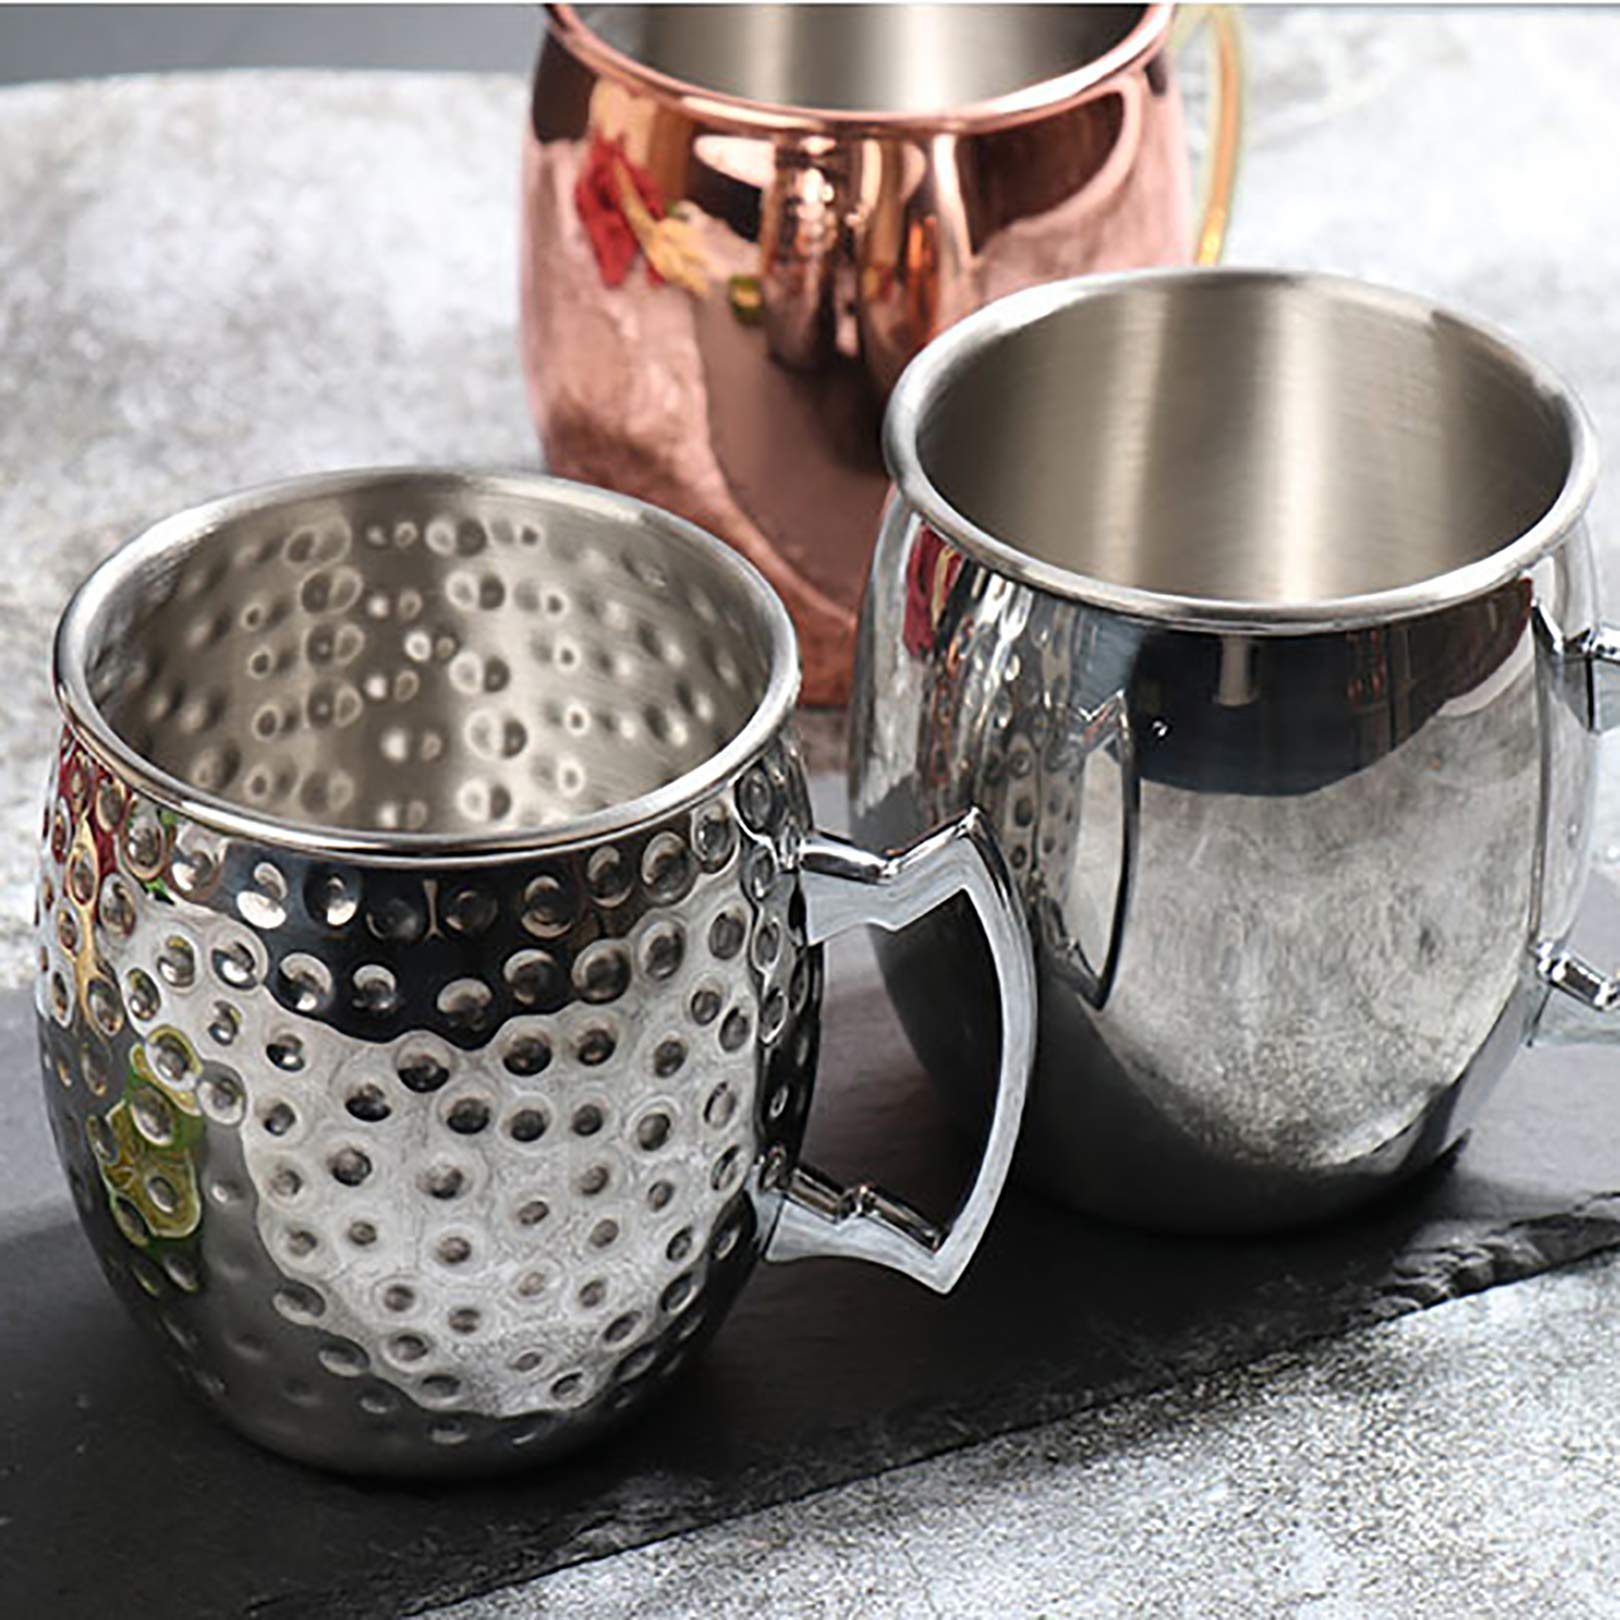 vilihkc 4pcs Moscow Mule Mugs Large Size 18 ounces Stainless Steel Lining Pure Copper Plating Gold Brass Handles with 5 heart-shaped stainless steel straws